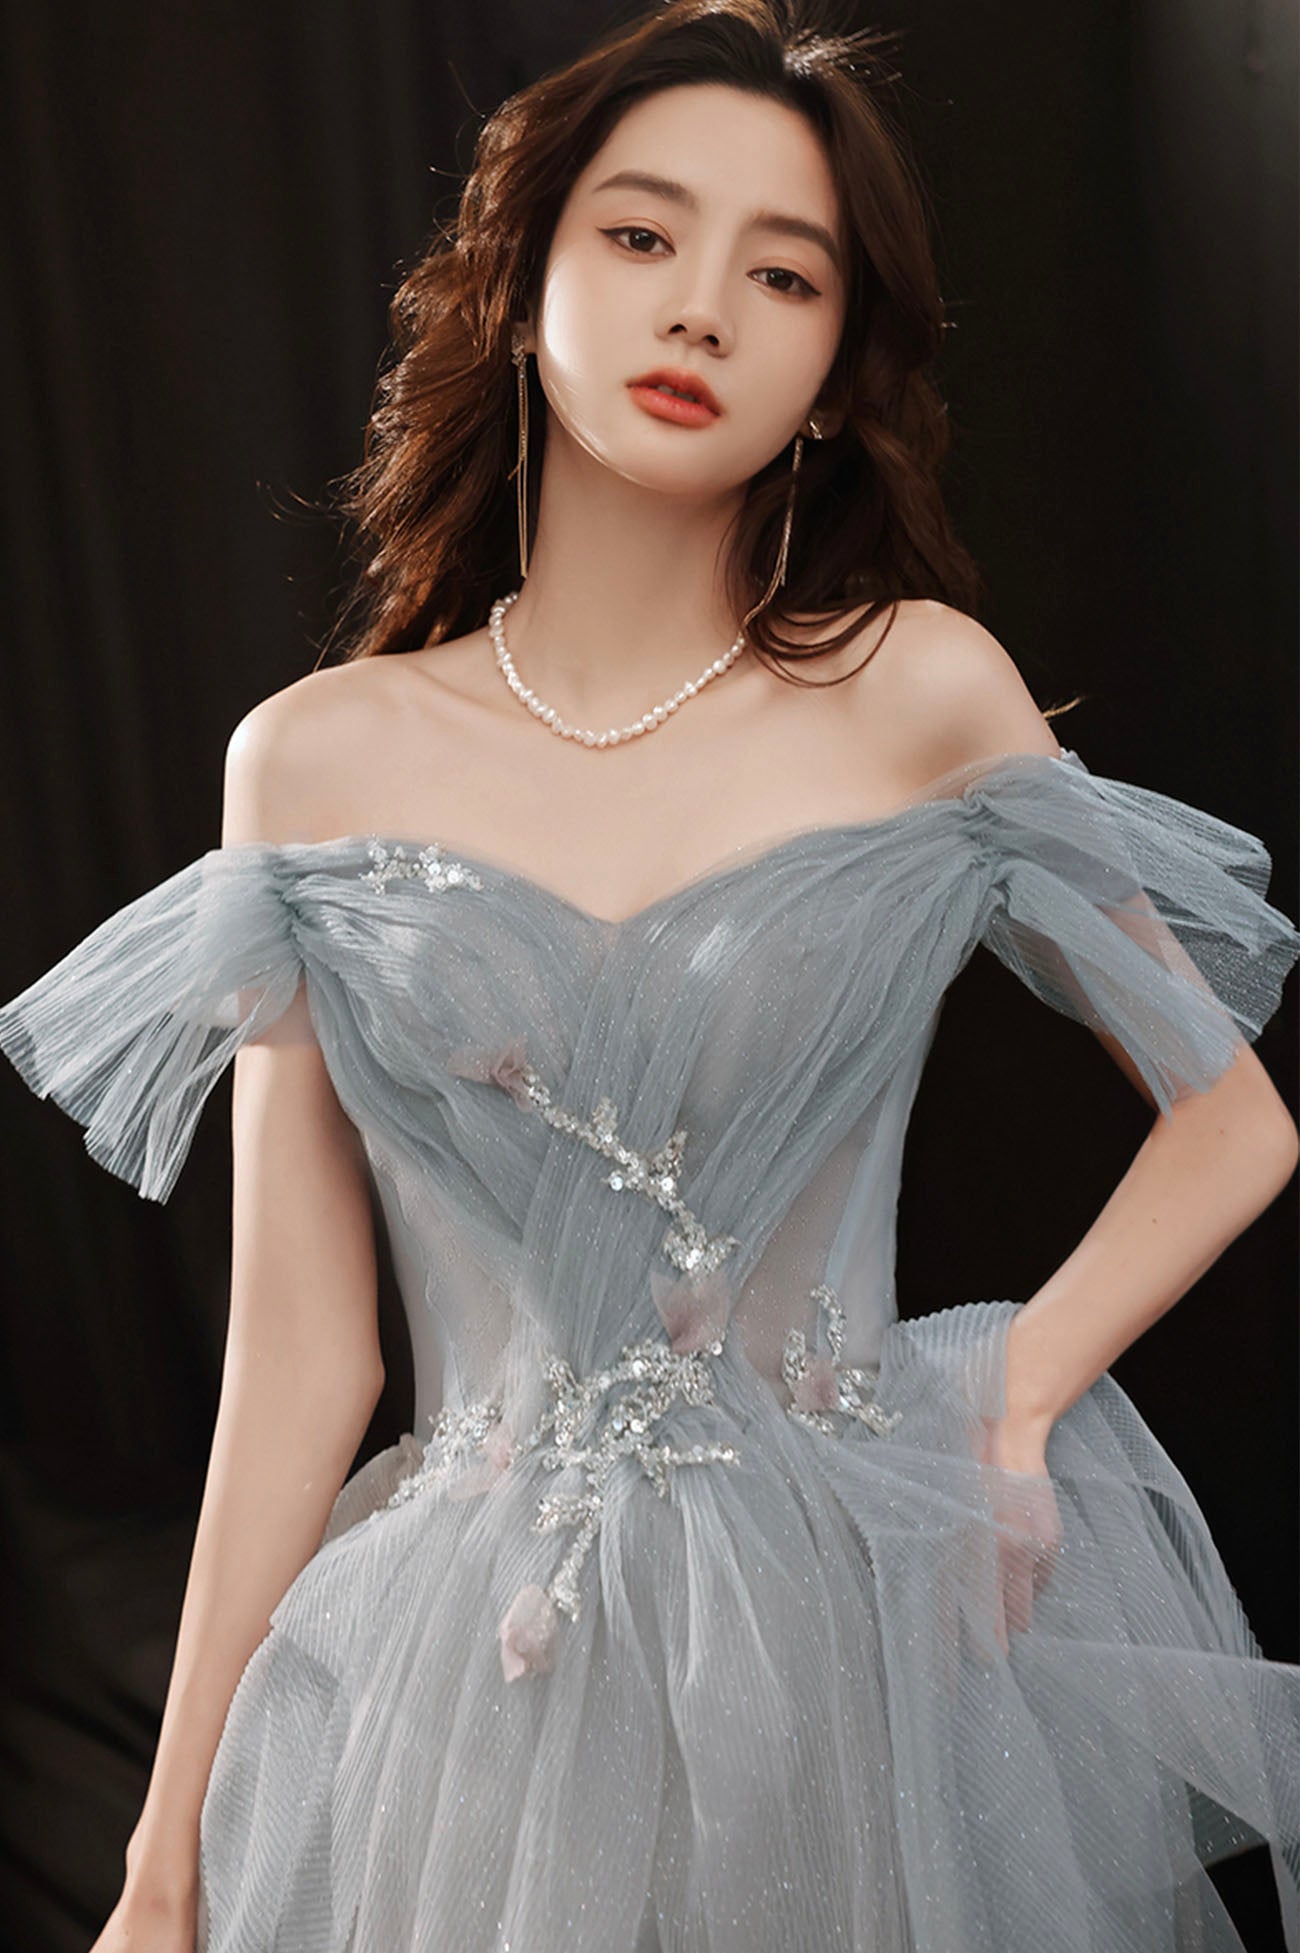 Gray Tulle Long A-Line Prom Dress, Off the Shoulder Evening Party Dress